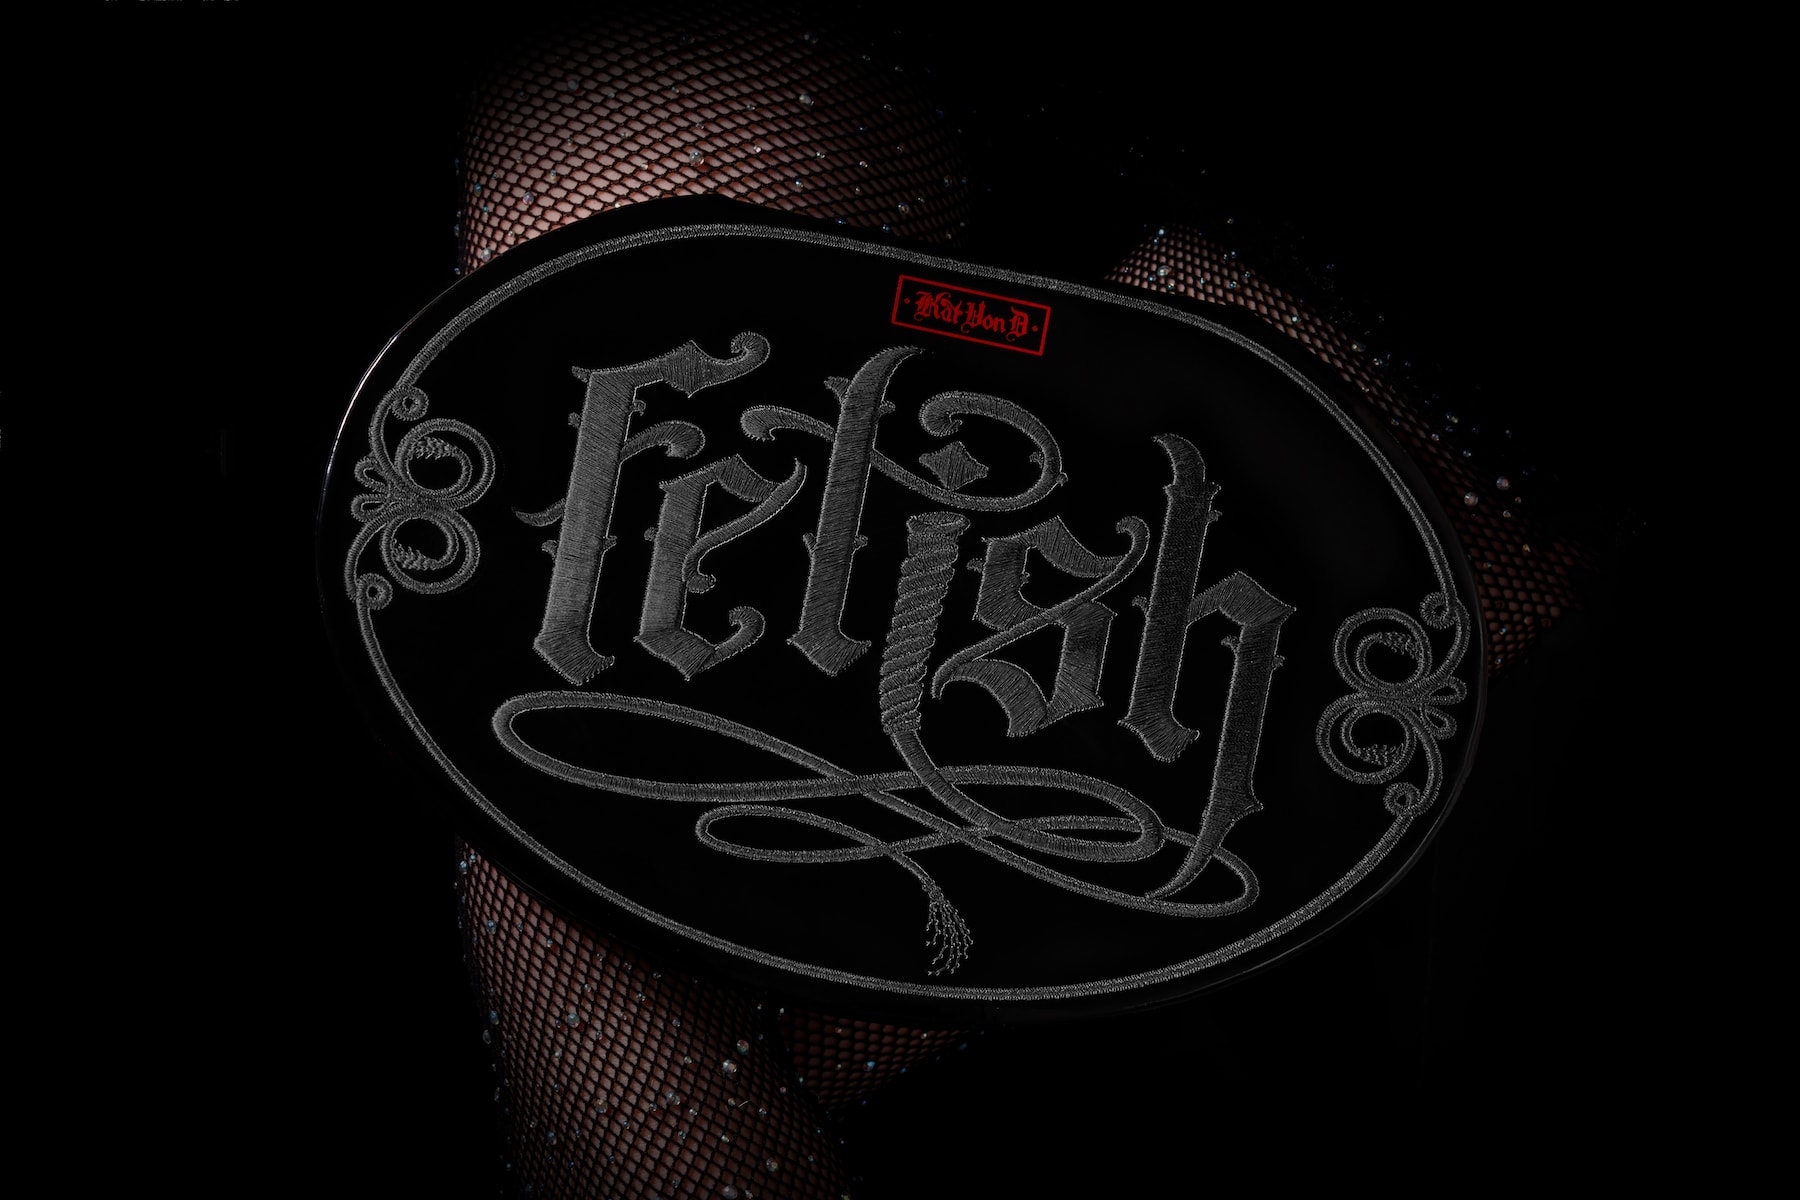 Kat Von D Fetish Collection Reveal Introduction Eyeshadow Makeup Beauty Highlighter Blush Palette